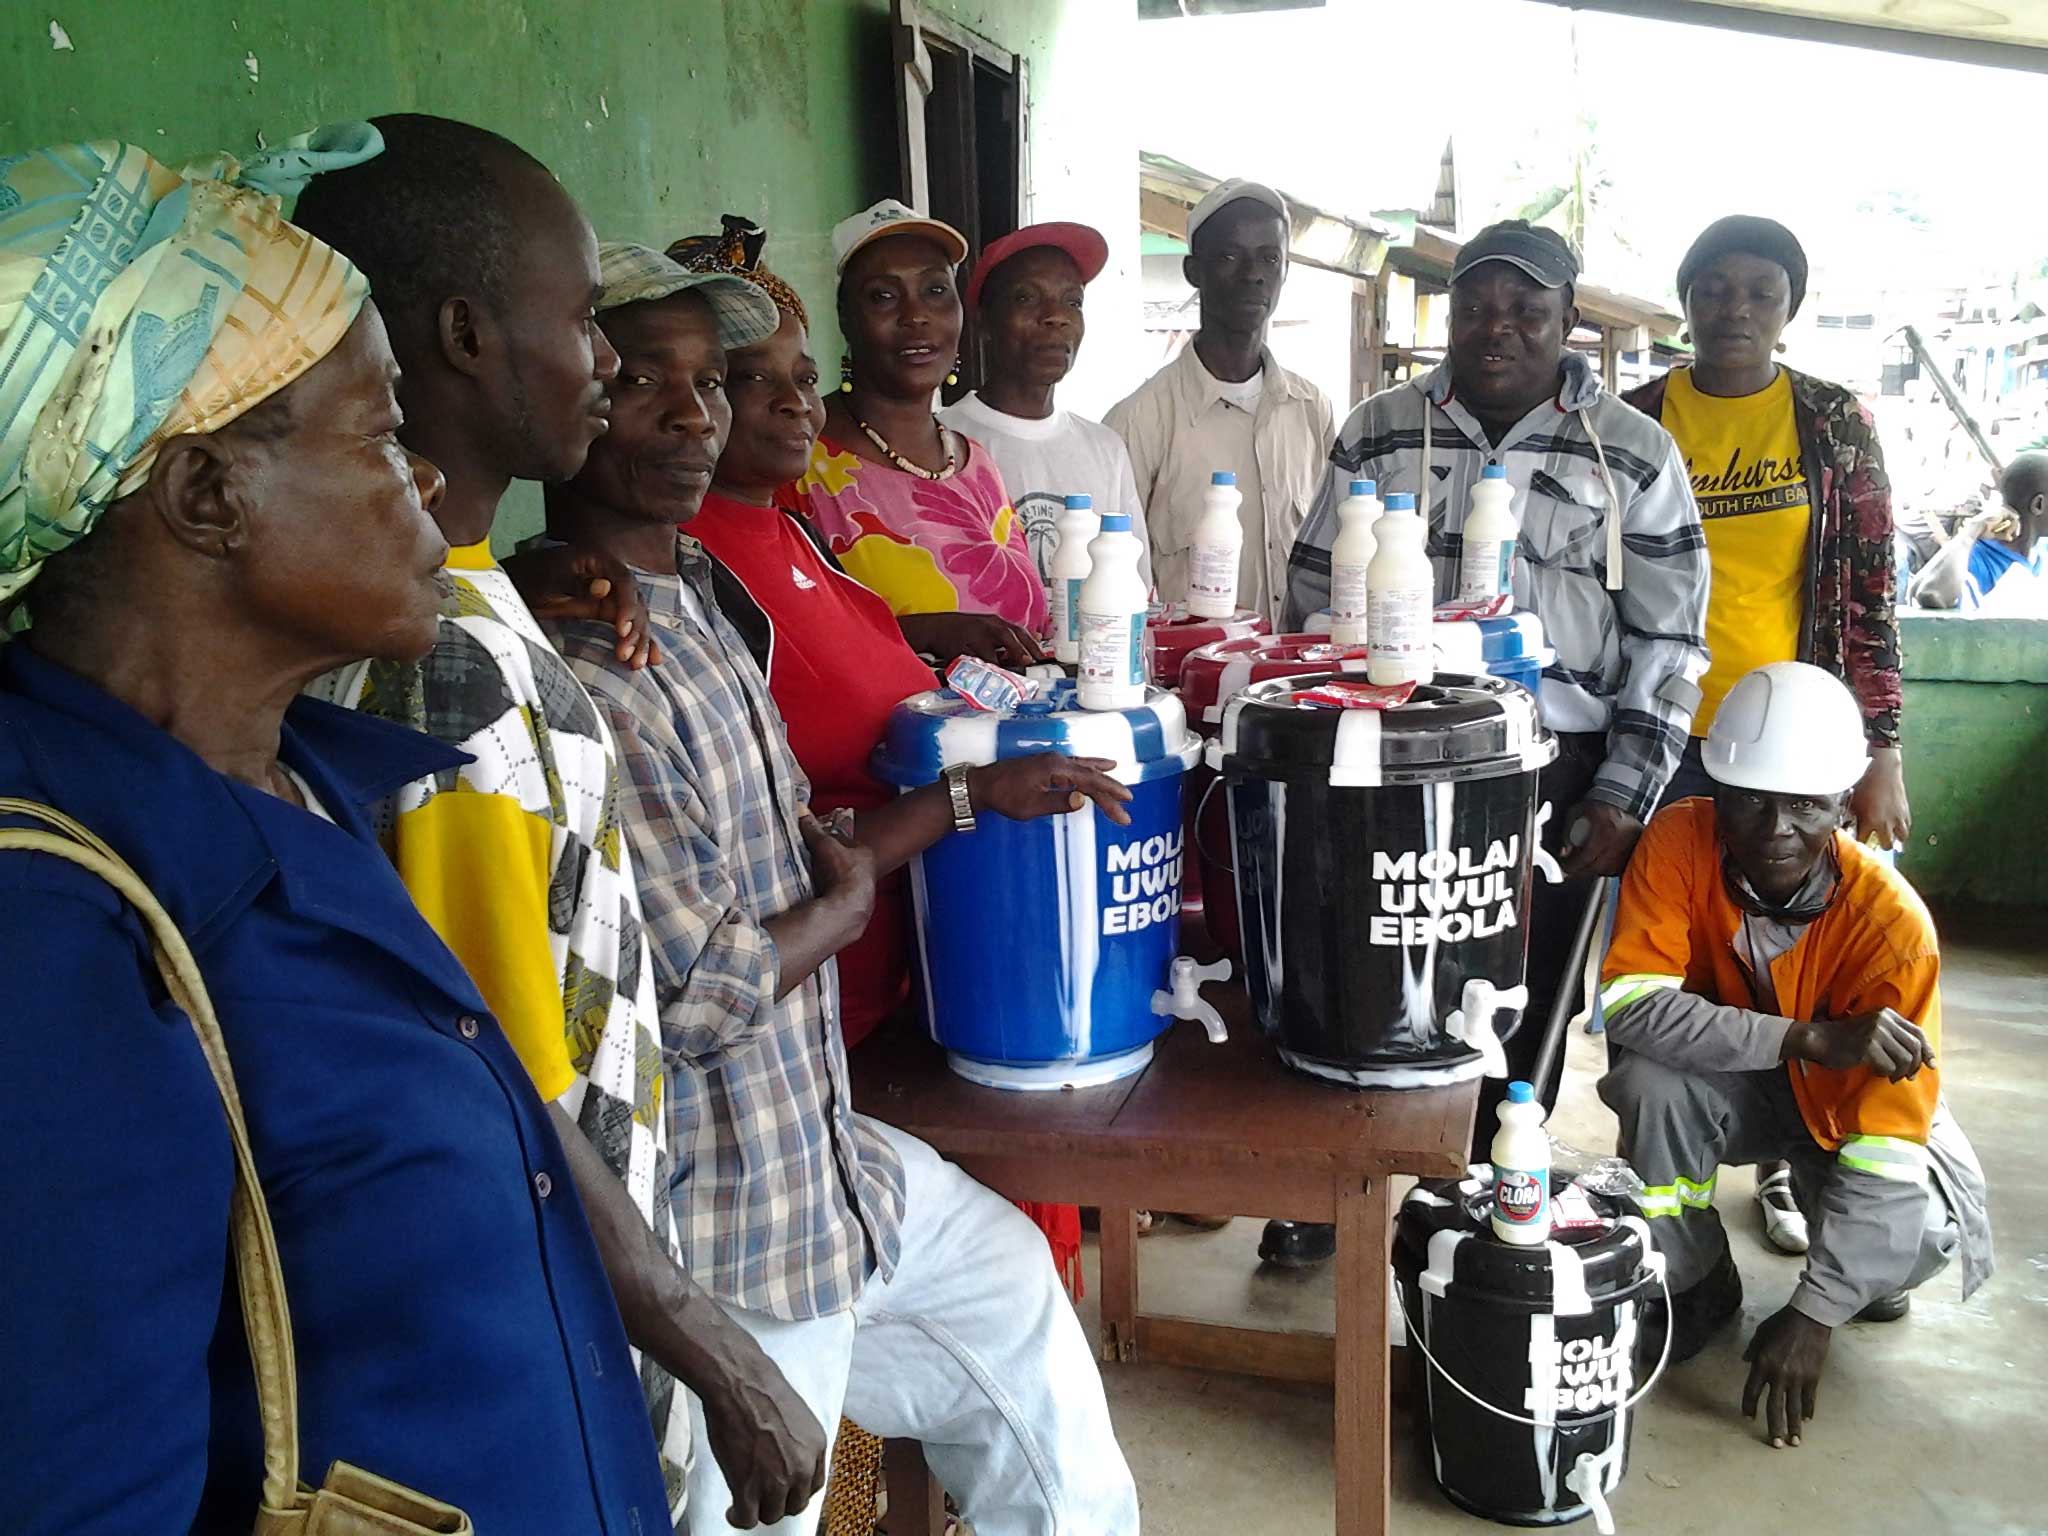 Union members are distributing buckets of chlorine to workers around Liberia.